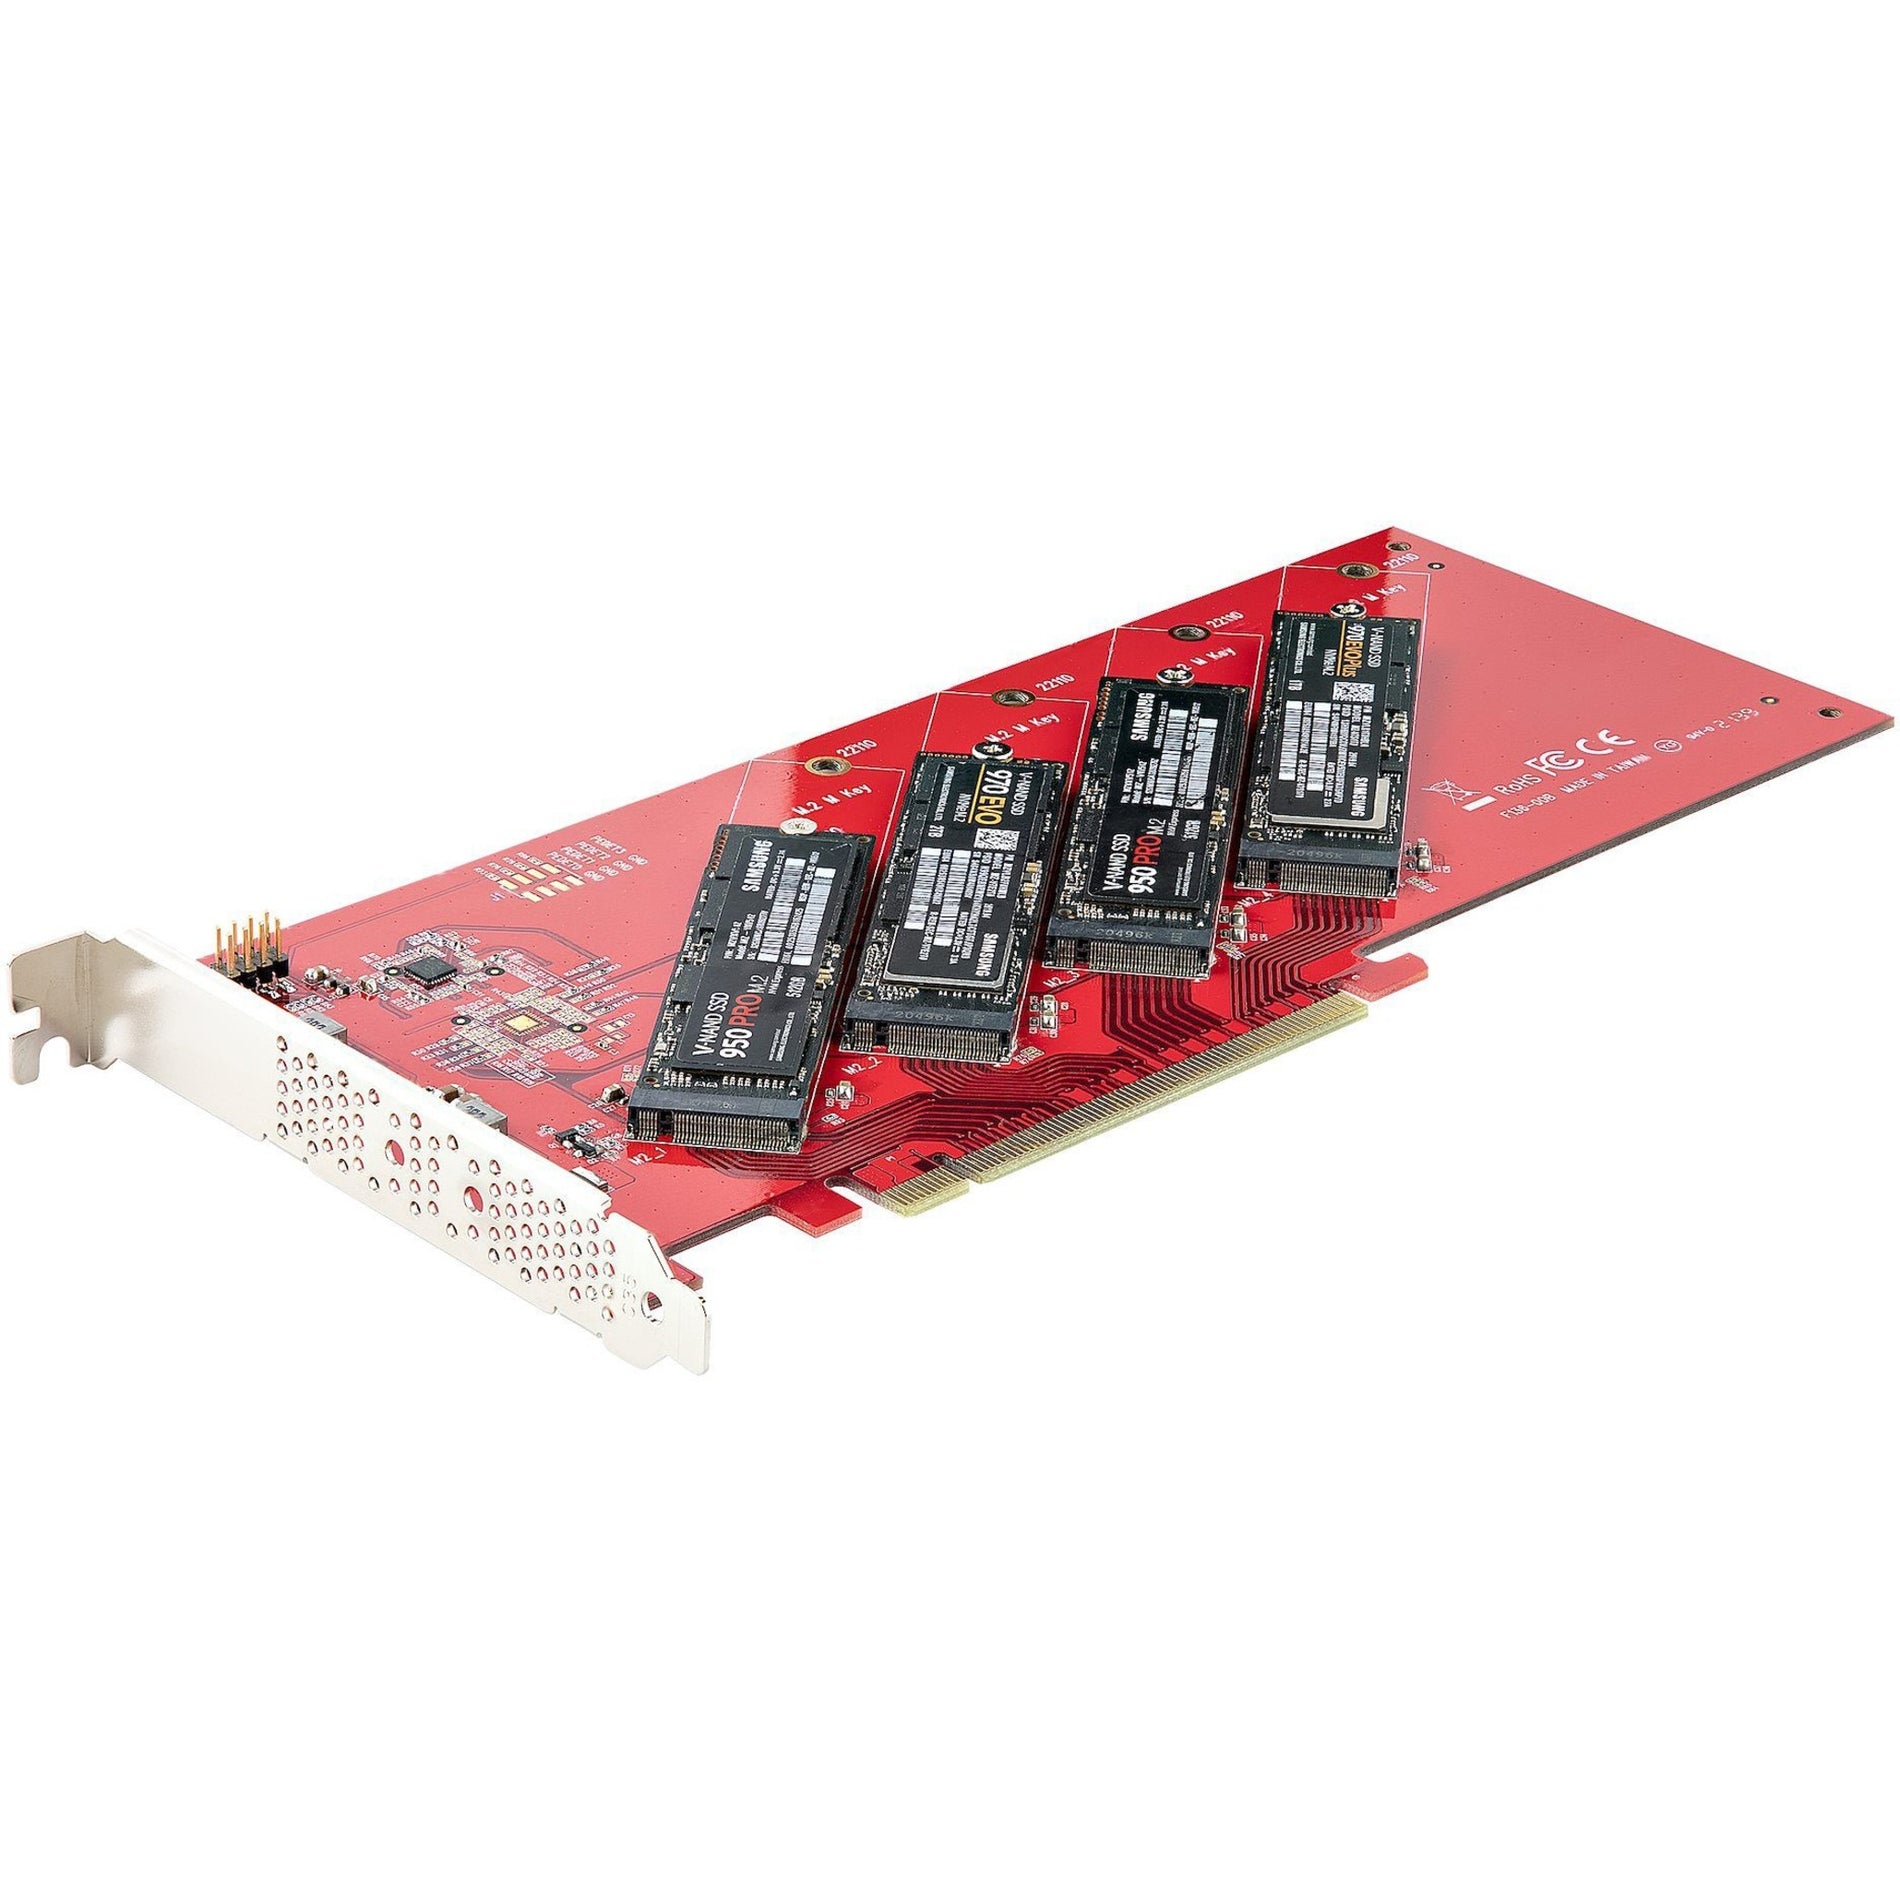 StarTech.com QUAD-M2-PCIE-CARD-B Quad M.2 PCIe Adapter Card, x16 Quad NVMe or AHCI M.2 SSD to PCI Express 4.0, Up to 7.8GBps/Drive